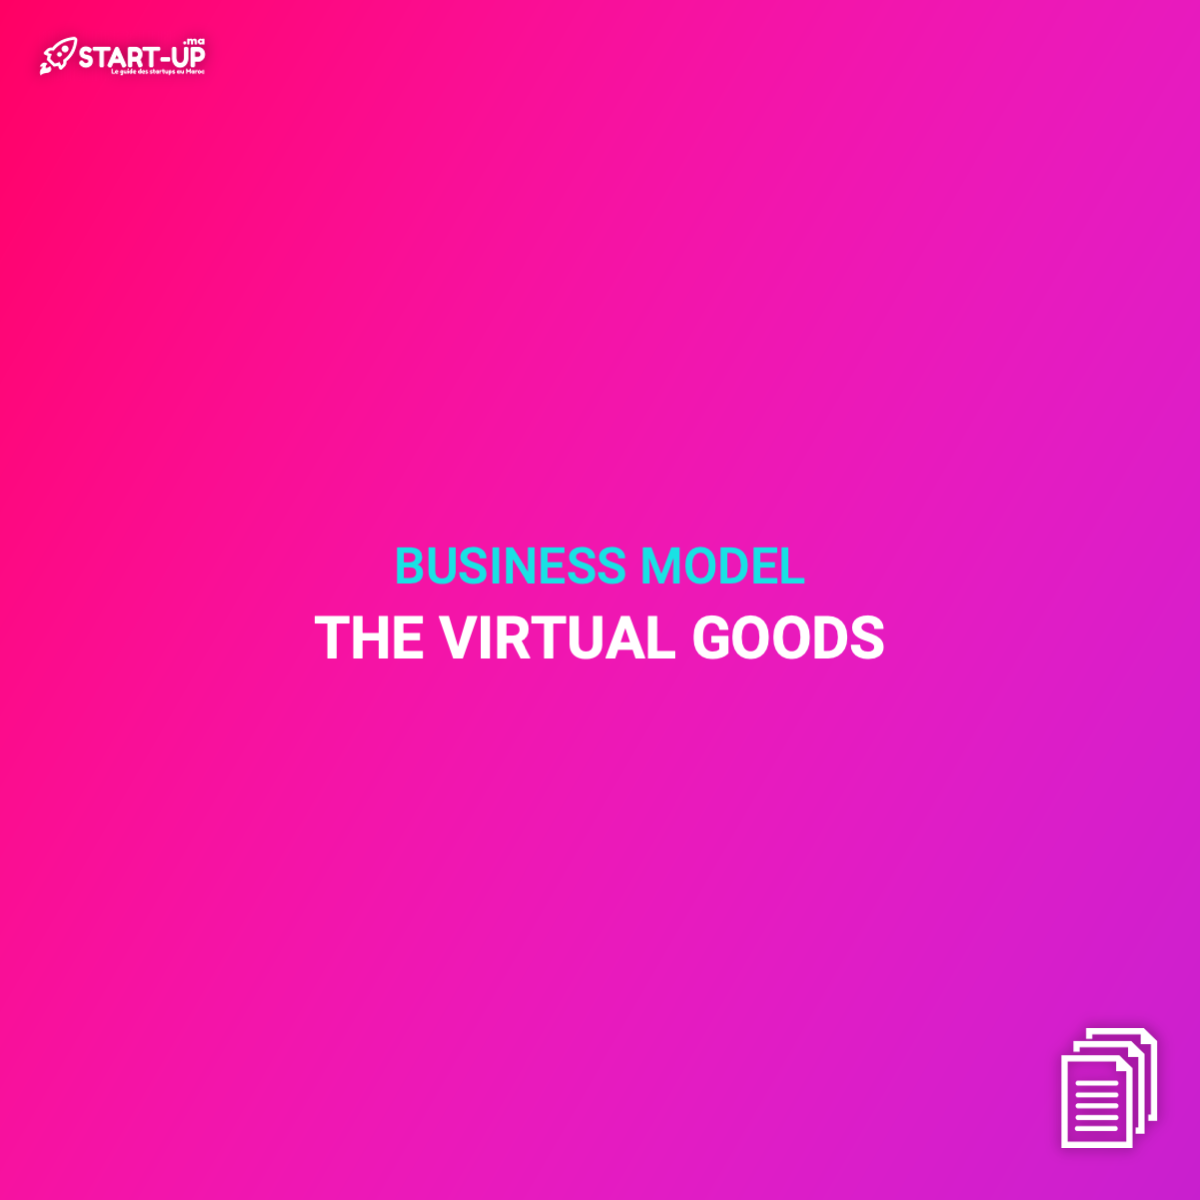 The virtual goods Business Model